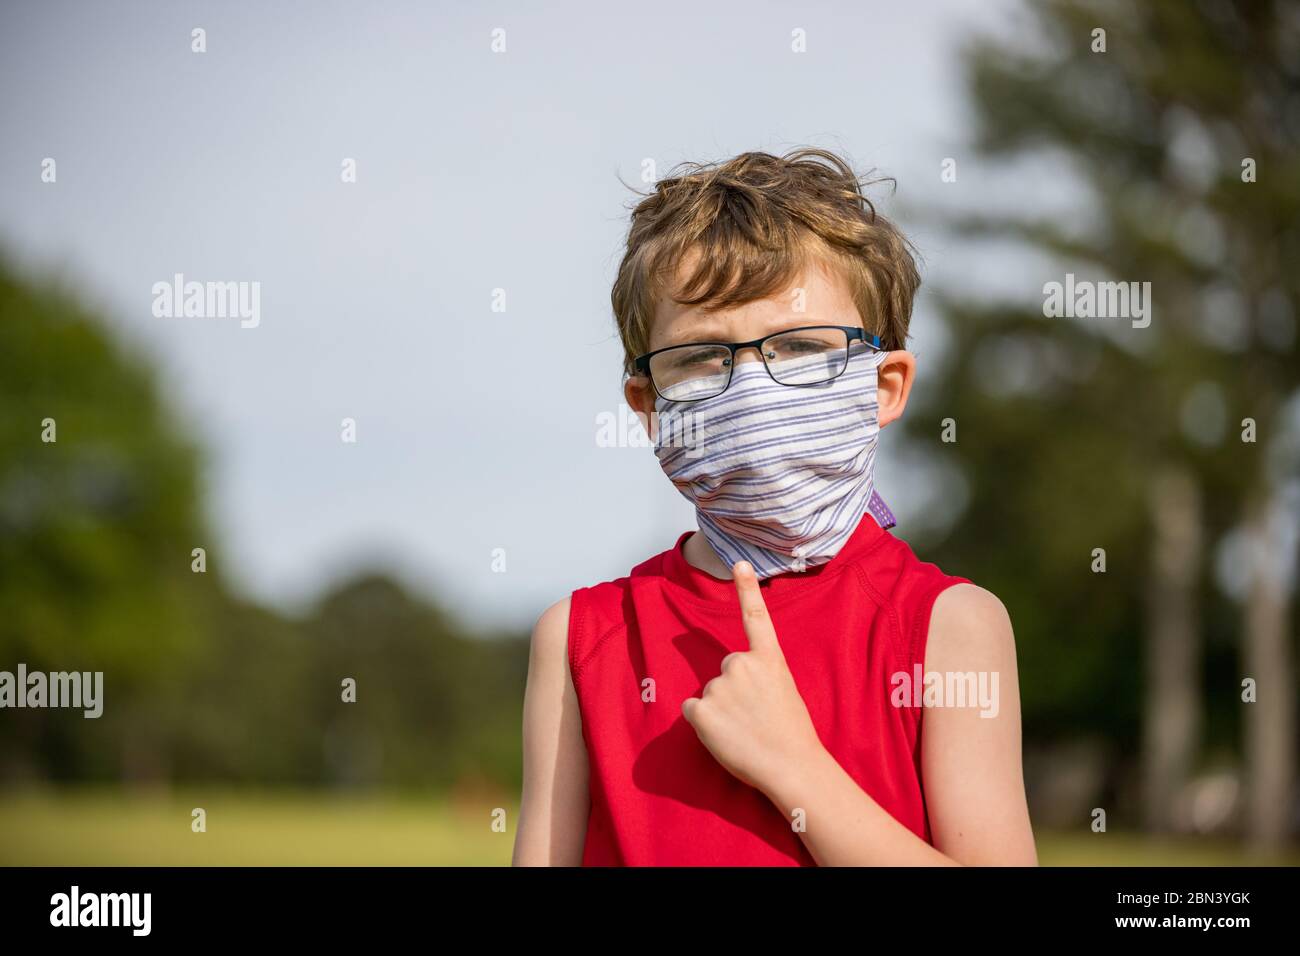 Child points to mask covering his face for protection during pandemic Stock Photo